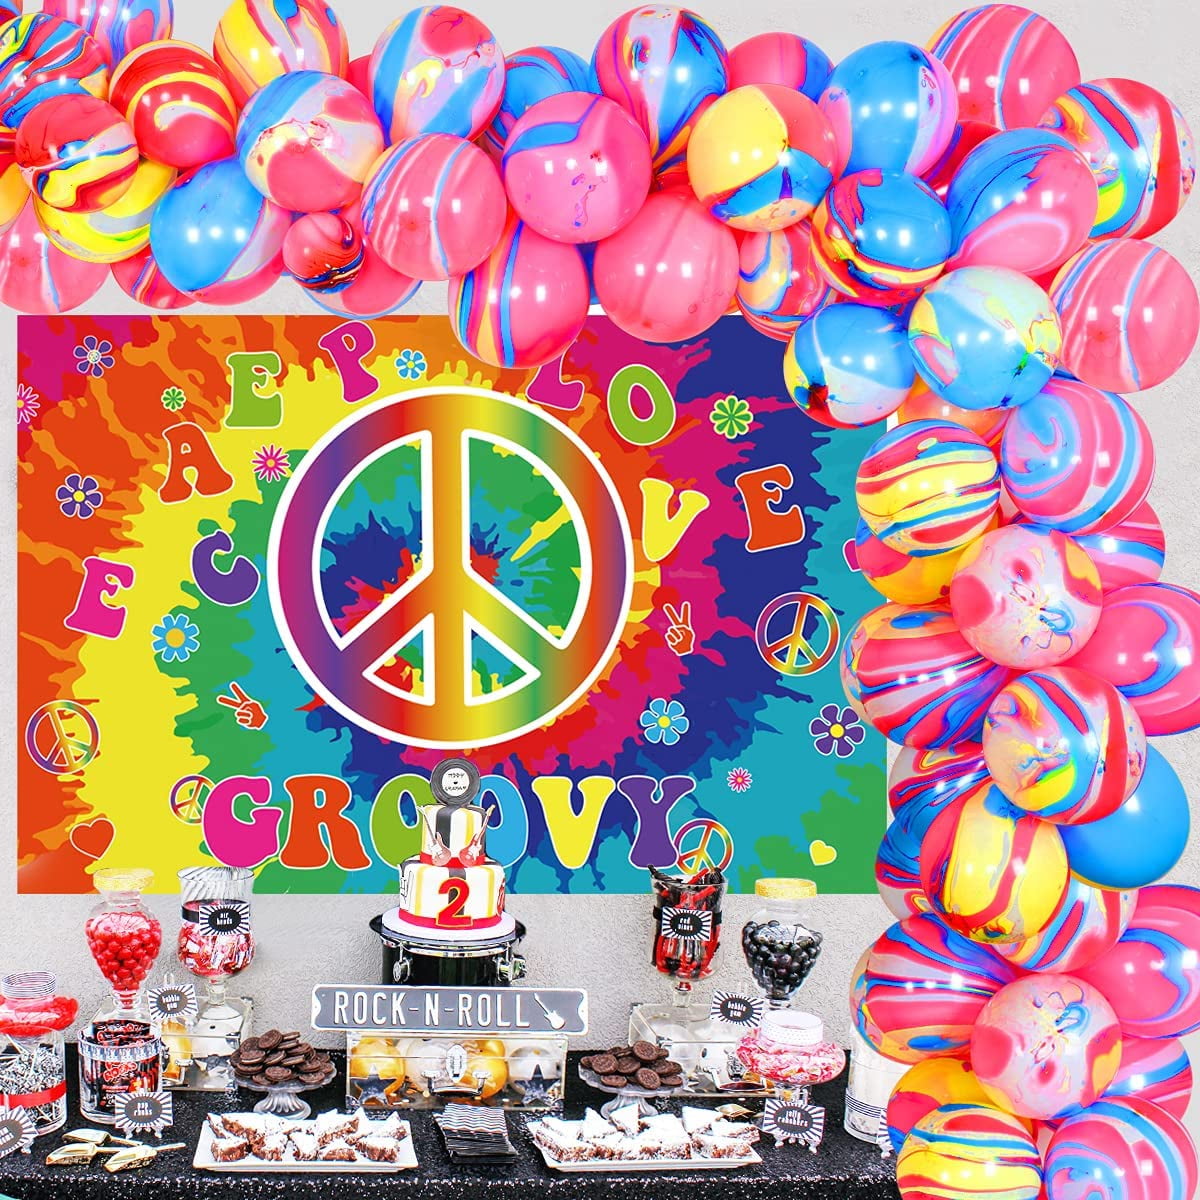 Peace Tie Dye Birthday Party Table Centerpiece  Birthday Party decorations  - Candles & Favors